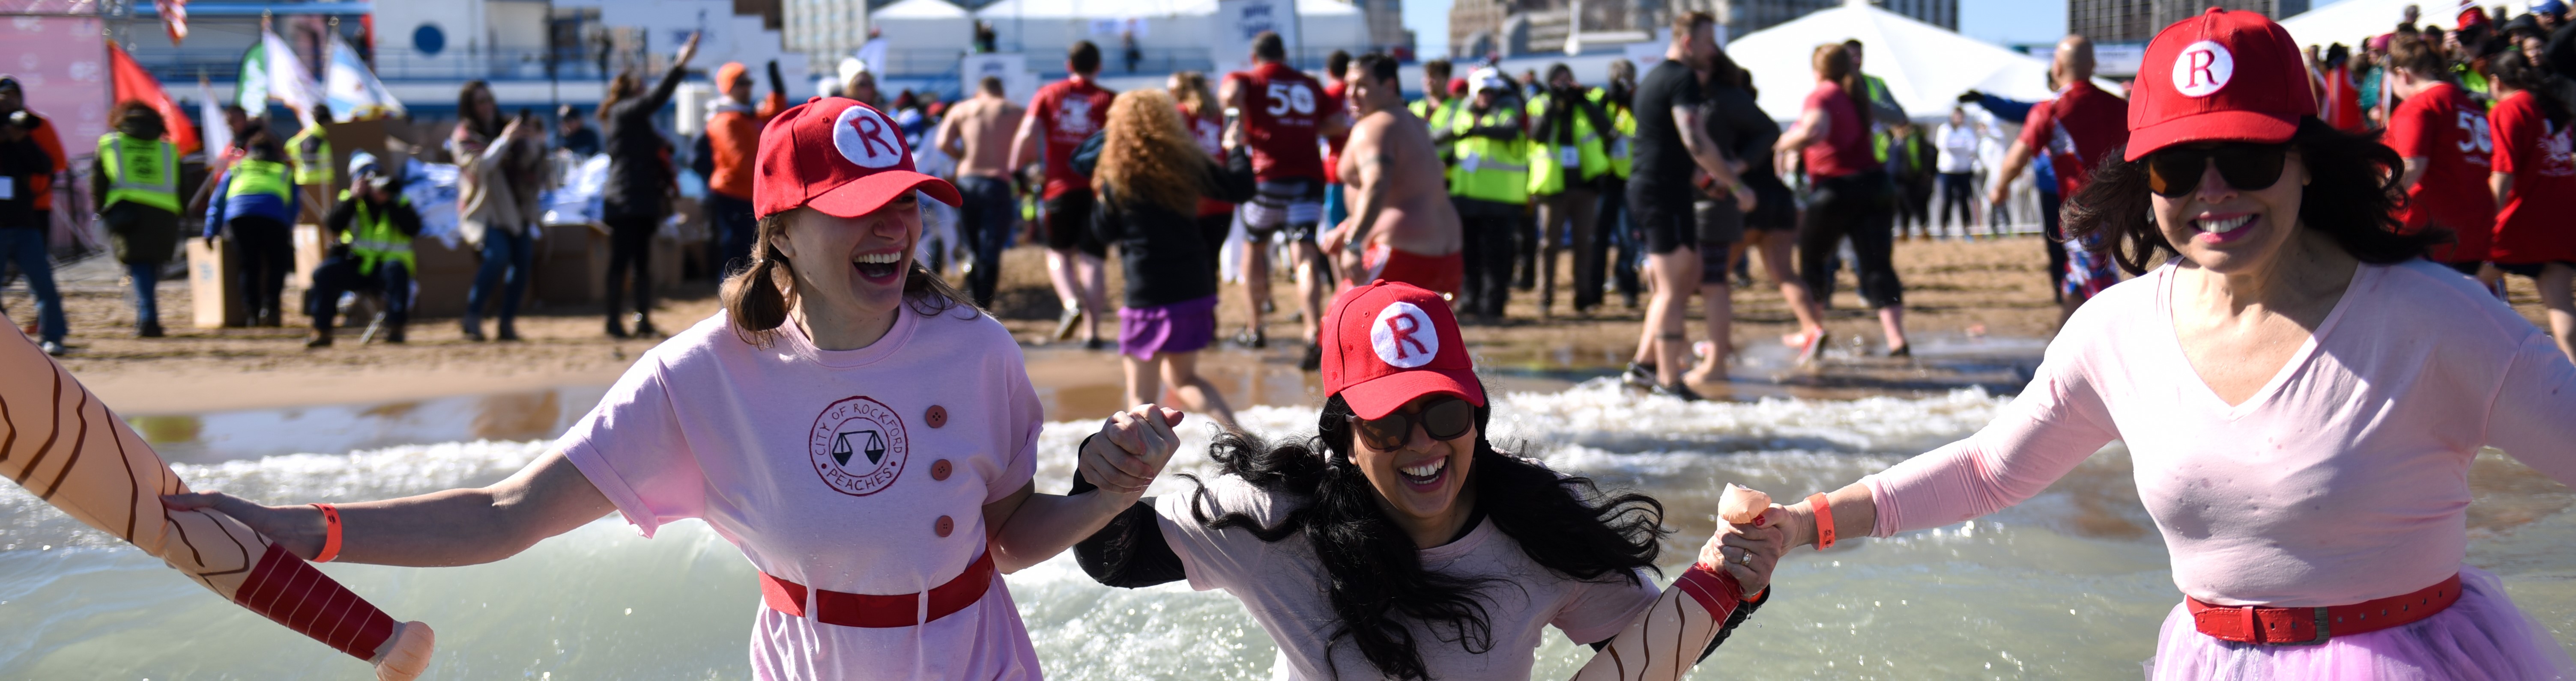 Polar Plunge Special Olympics Chicago